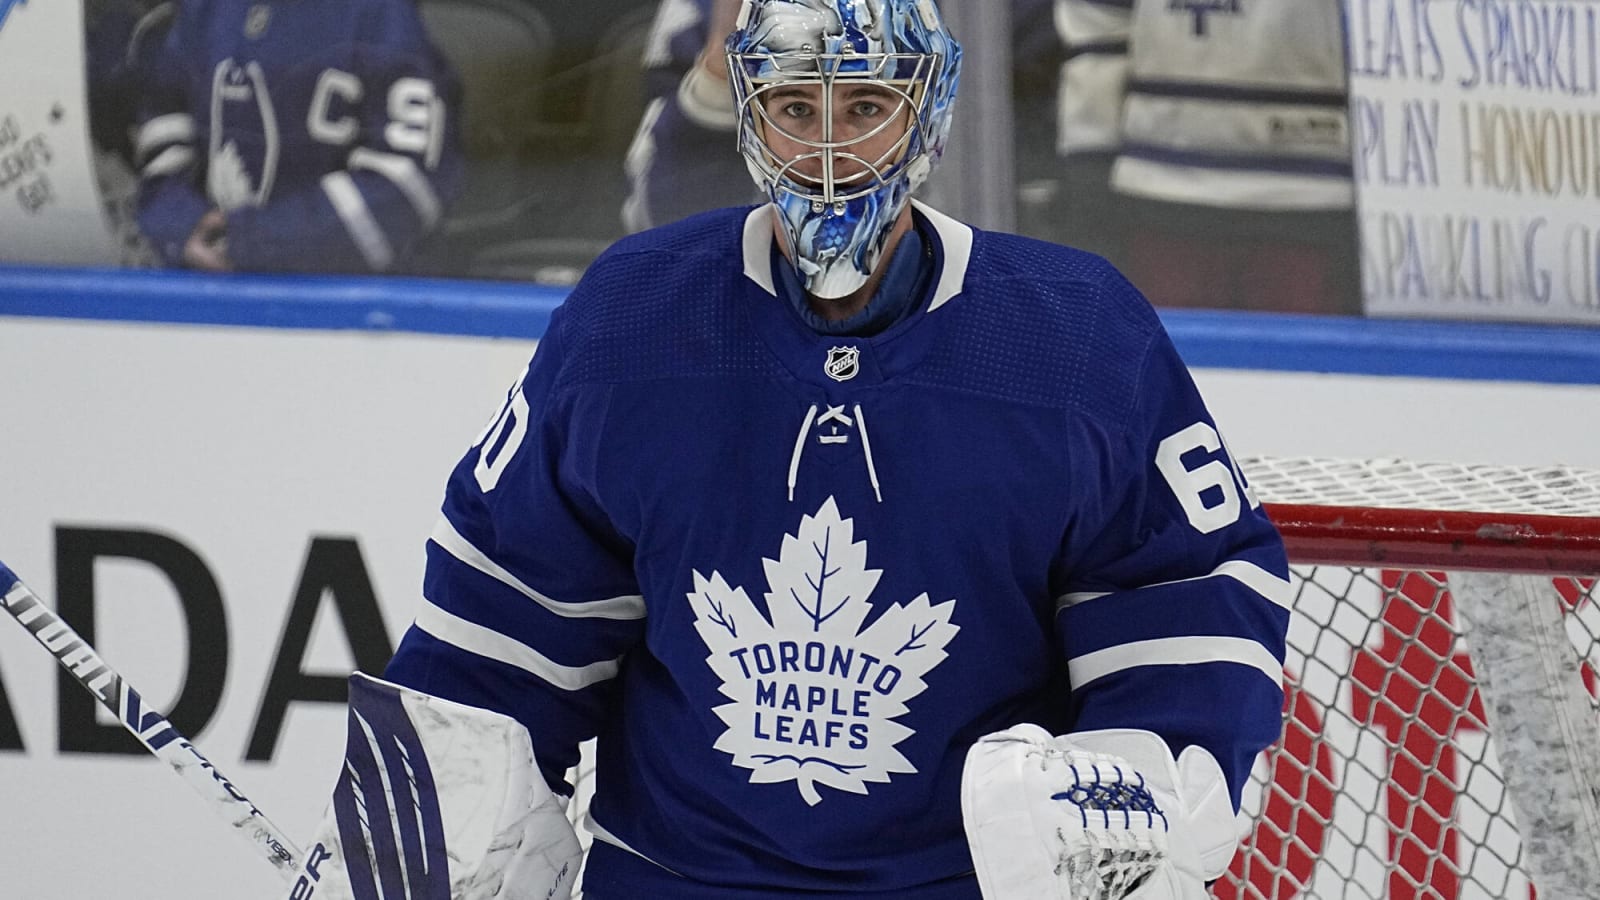 Joseph Woll has played his way into being next goaltender called up to Maple Leafs